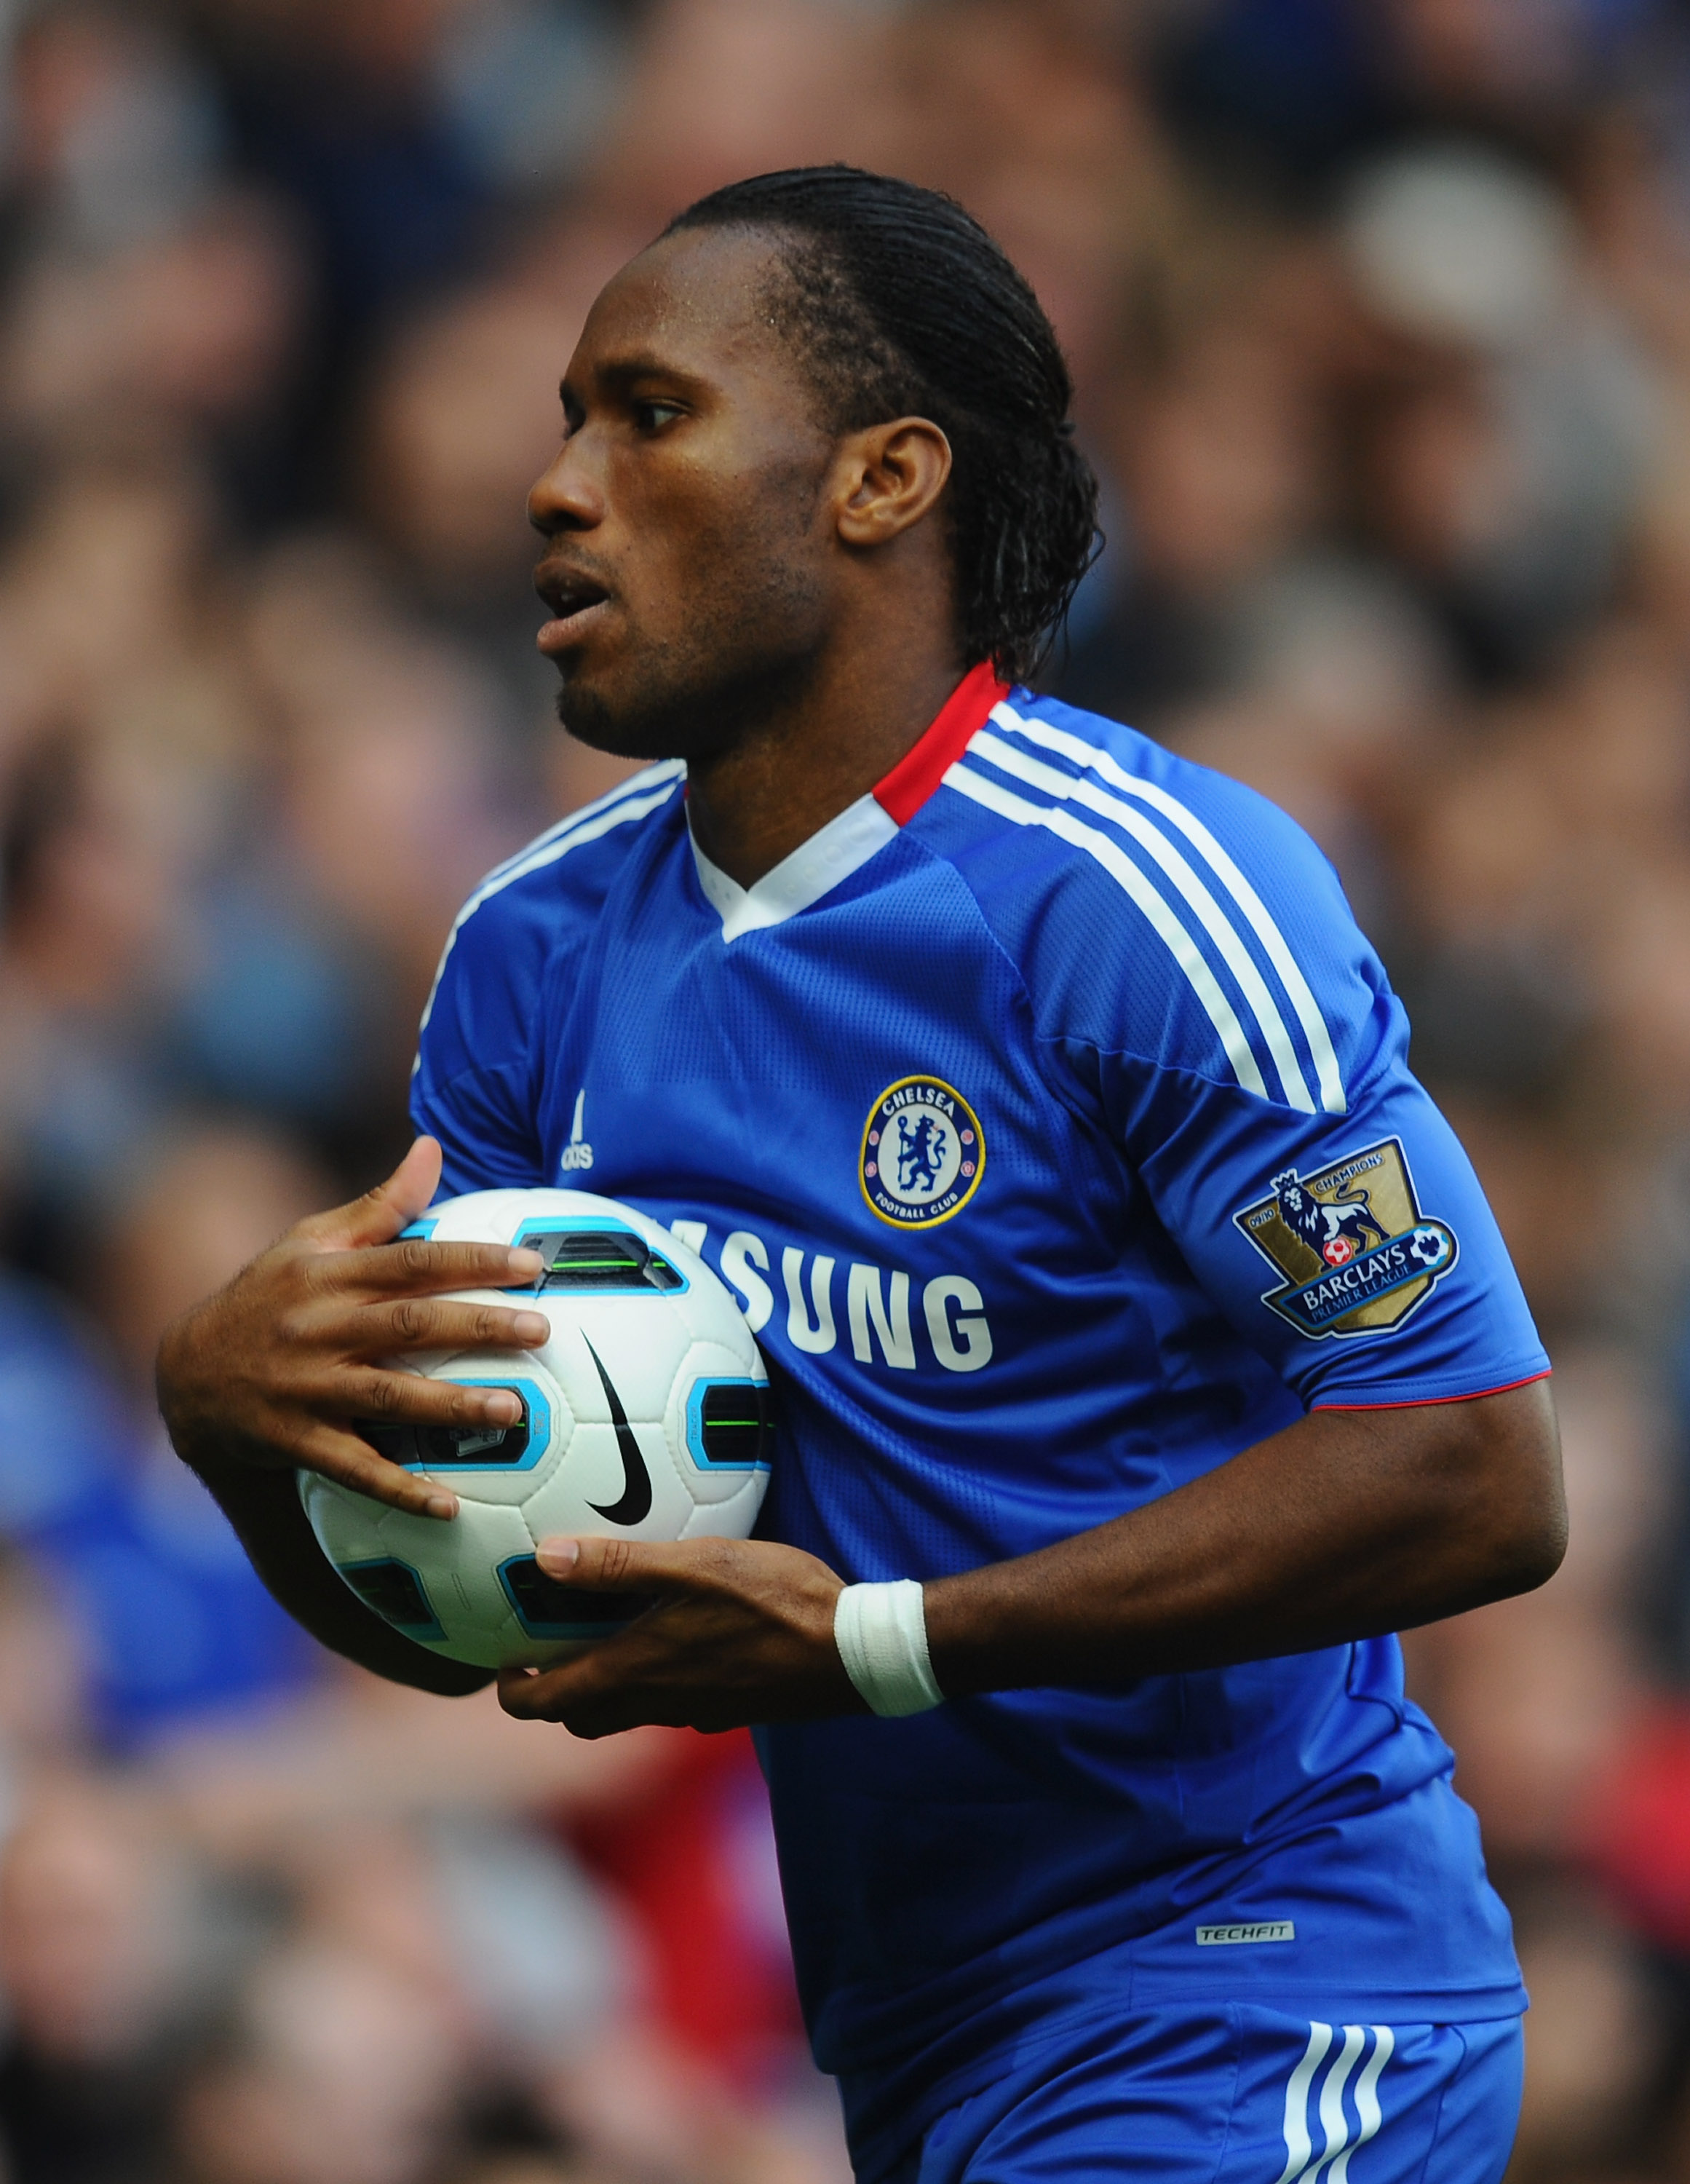 LONDON, ENGLAND - OCTOBER 03:  Didier Drogba of Chelsea in action during the Barclays Premier League match between Chelsea and Arsenal at Stamford Bridge on October 3, 2010 in London, England.  (Photo by Mike Hewitt/Getty Images)